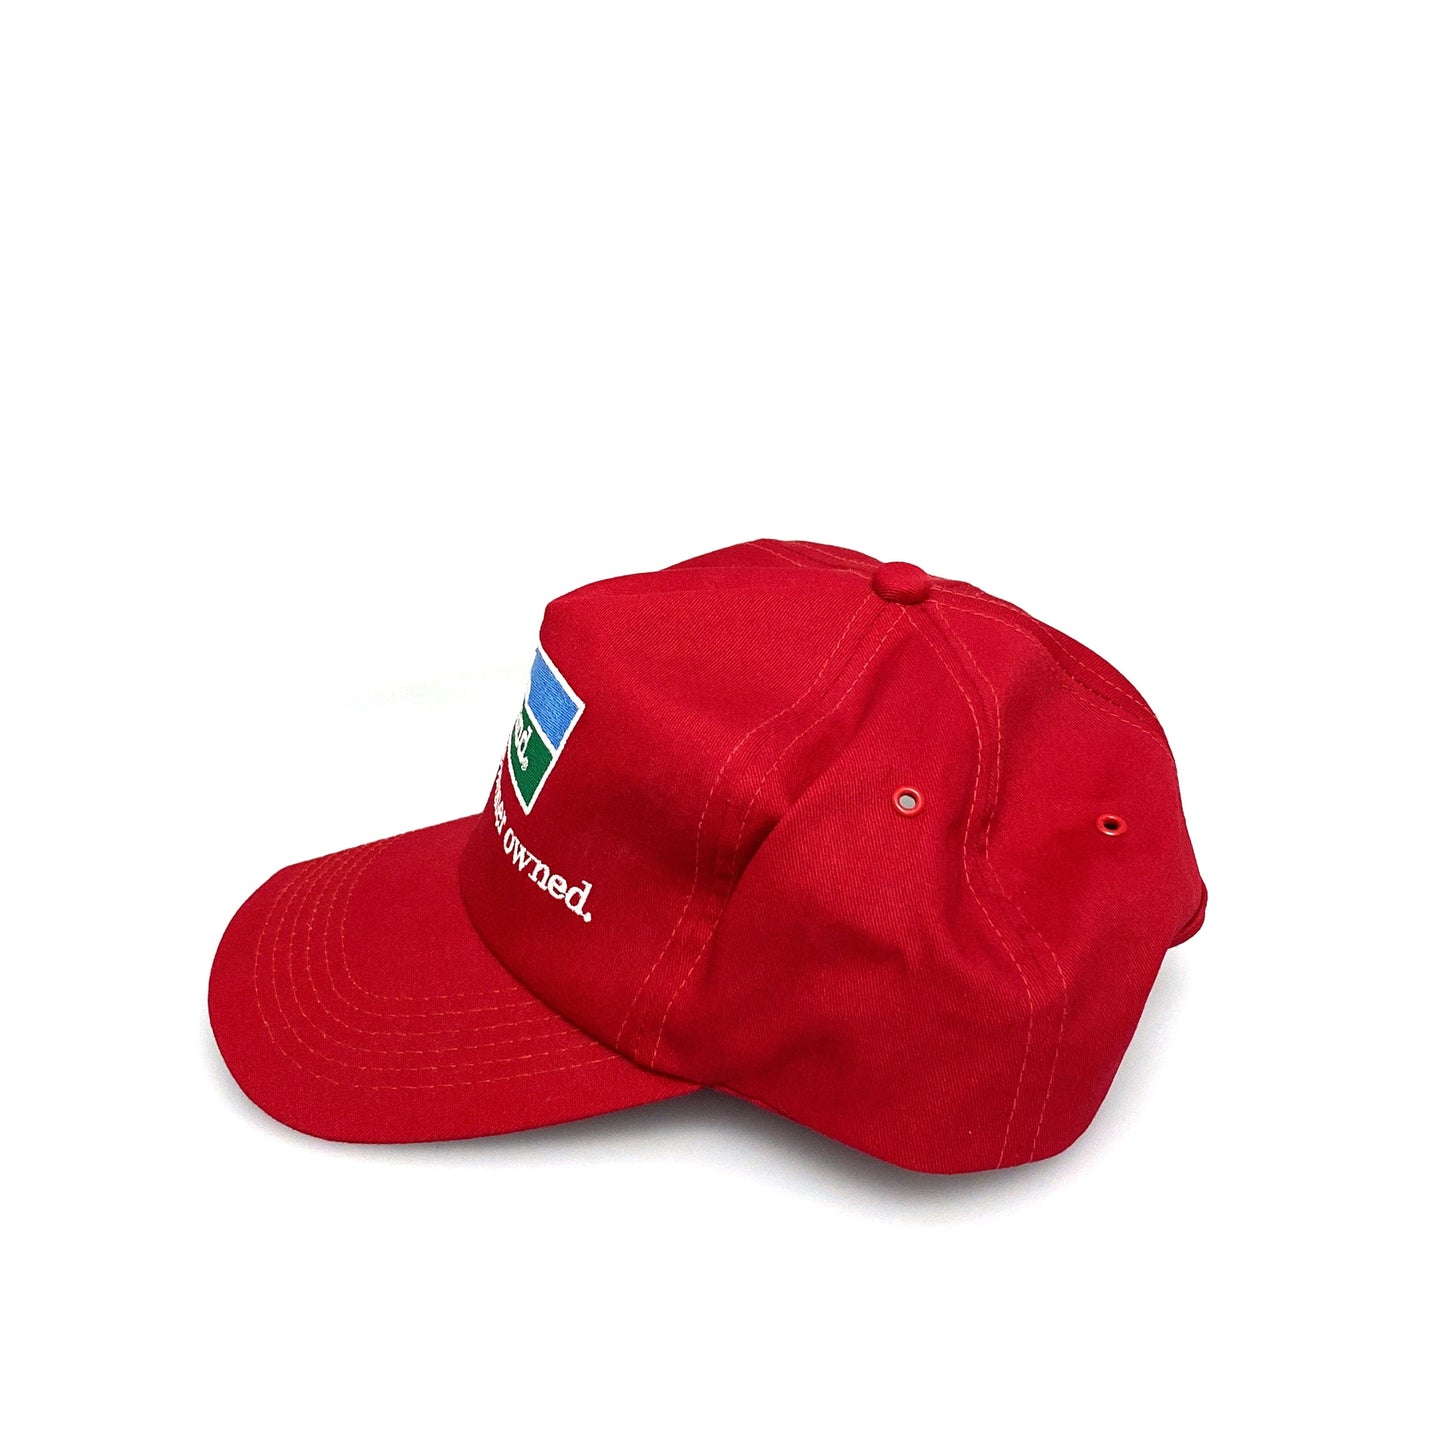 K-Products FARMLAND “Proud To Be A Farmer” 5-Panel Hat SnapBack OS Red Baseball Cap